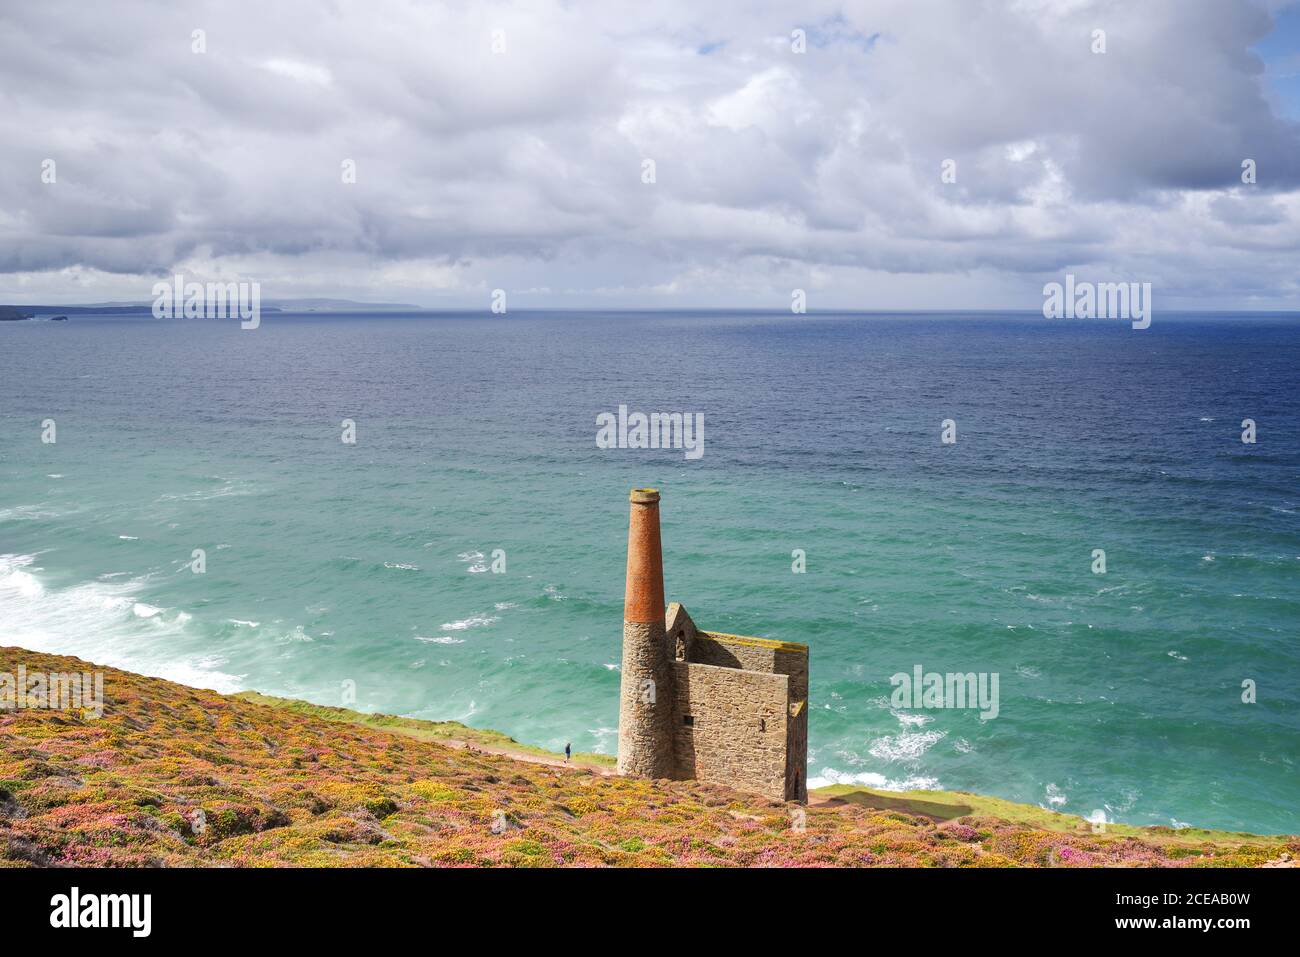 Ruins of the Towanroath Shaft Pumping Engine House on the site of the former Wheal Coates tin mine - Cornwall, UK Stock Photo